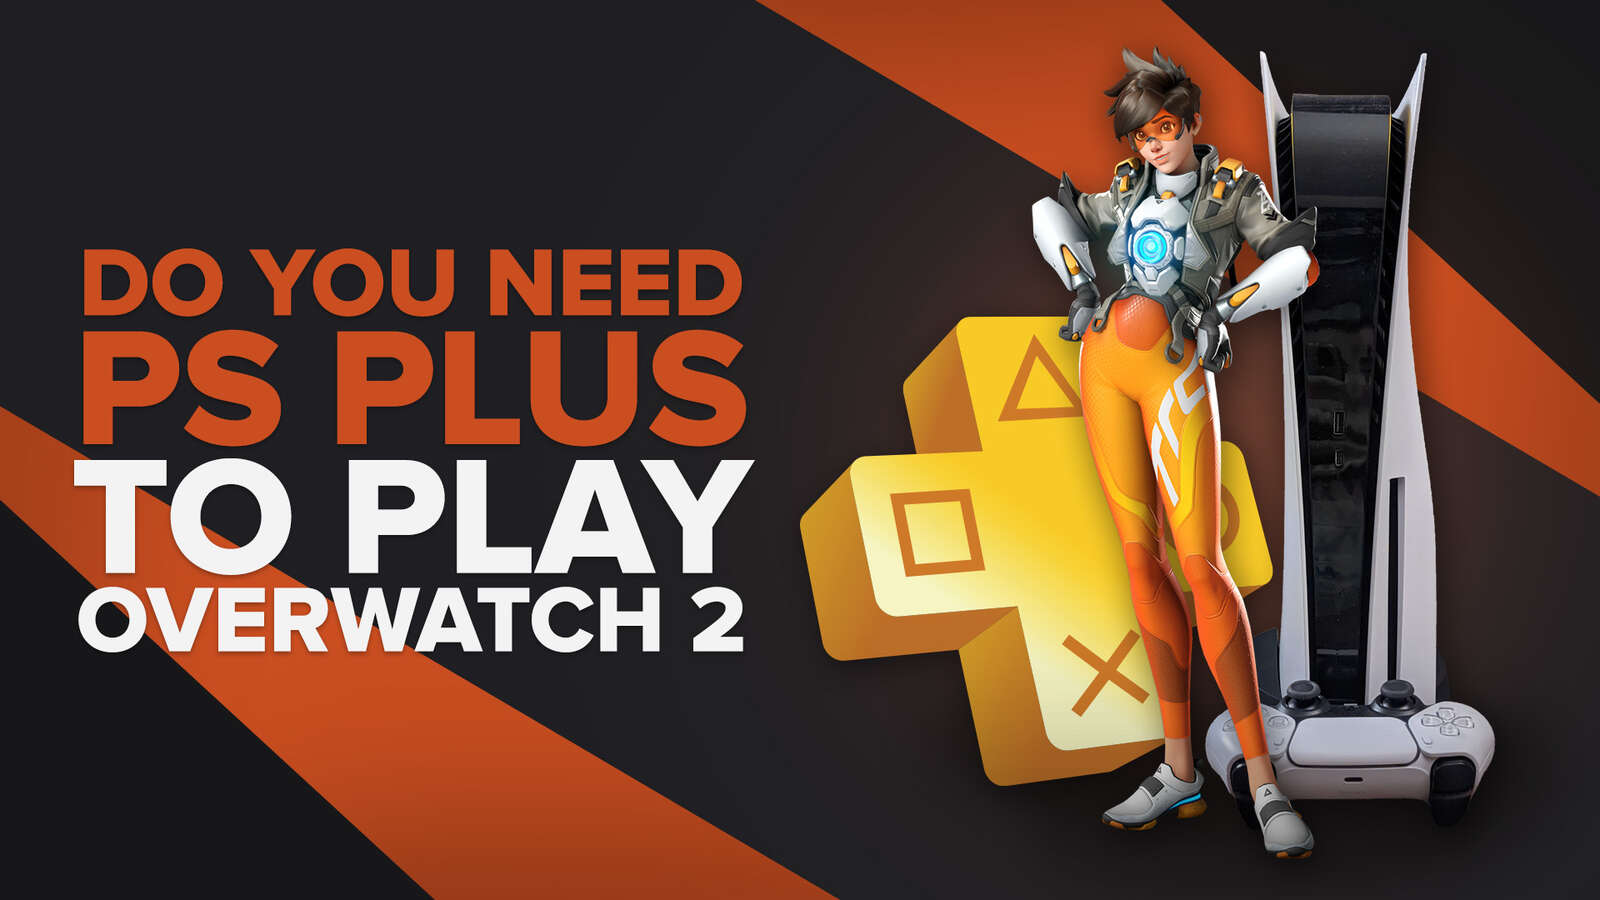 Do You Need PS Plus to Play Overwatch on PlayStation